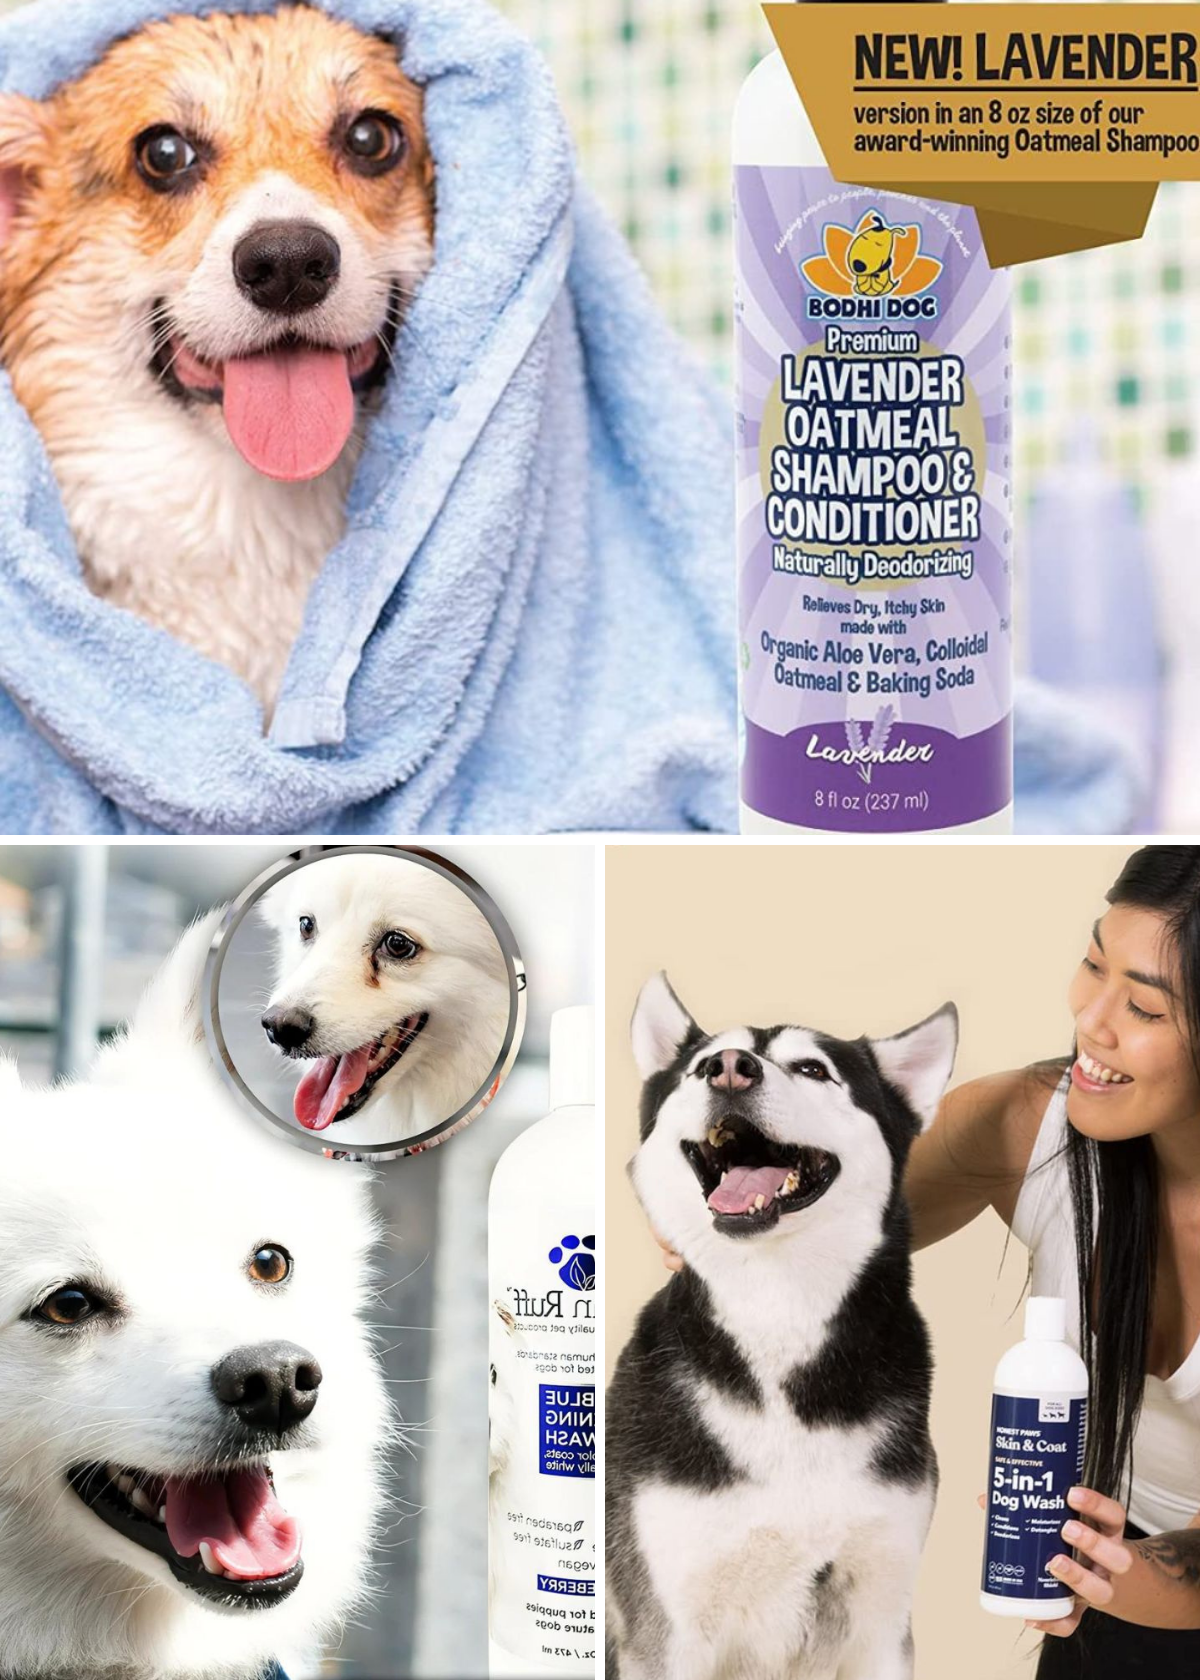 Pooch Perfection: Reviewing 5 Deodorizing Dog Shampoos To Keep Your Fur Baby Smelling Fresh!